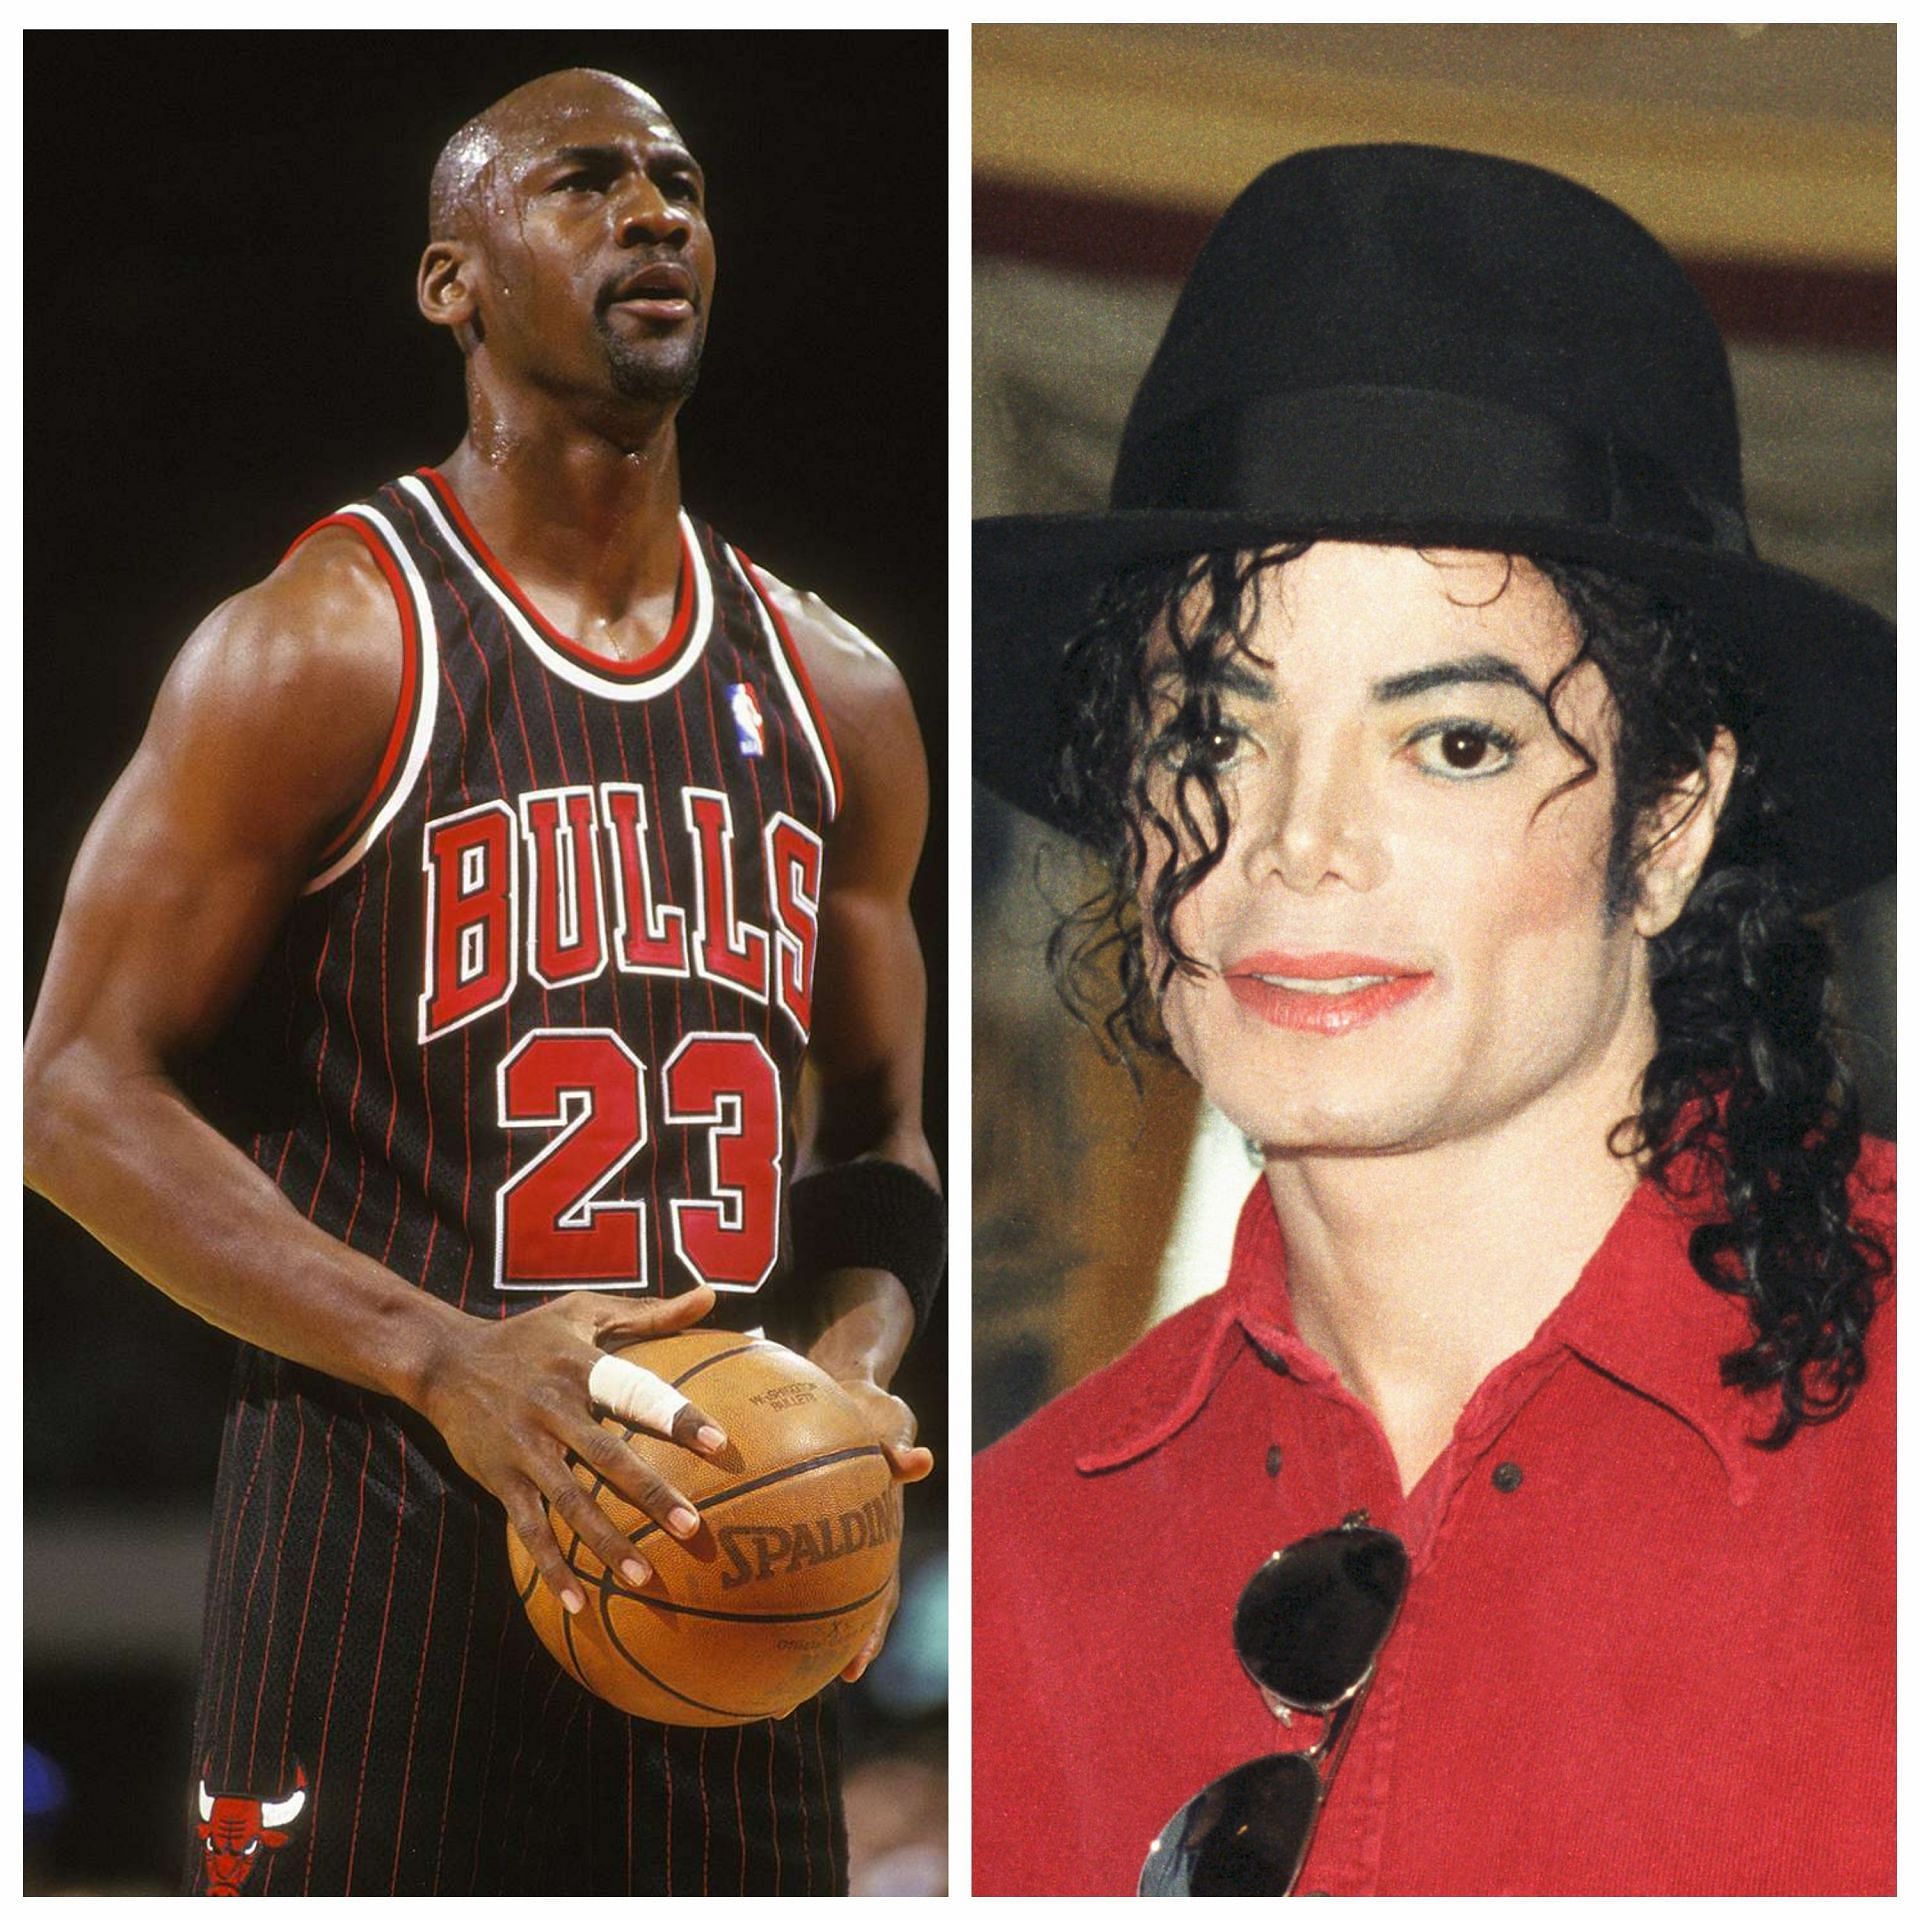 Michael Jordan ended up looking embarrassing once he traded his talent with Michael Jackson 